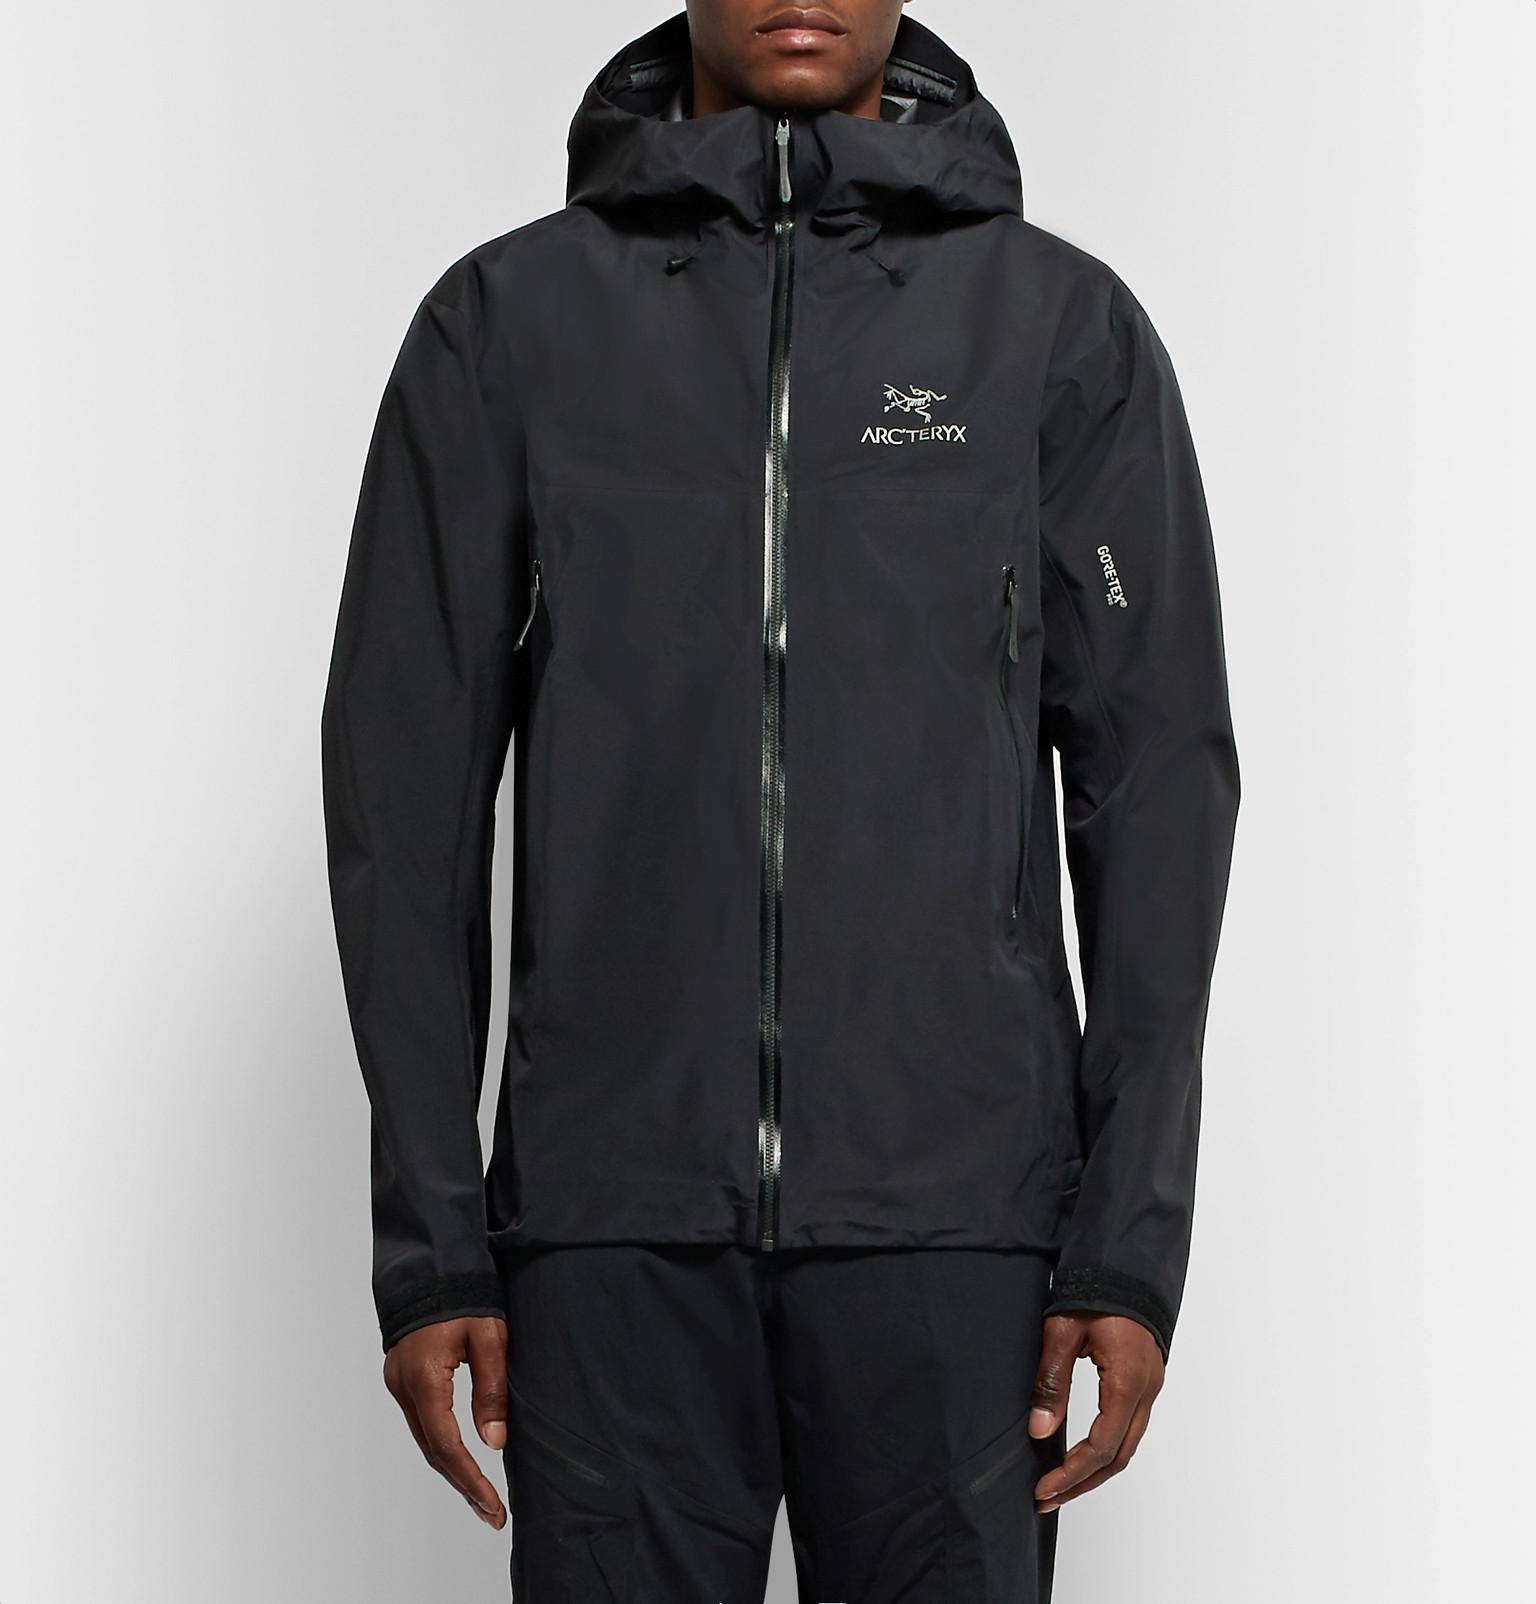 Arc'teryx Synthetic Beta Lt Gore-tex Hooded Jacket in Black for Men - Lyst